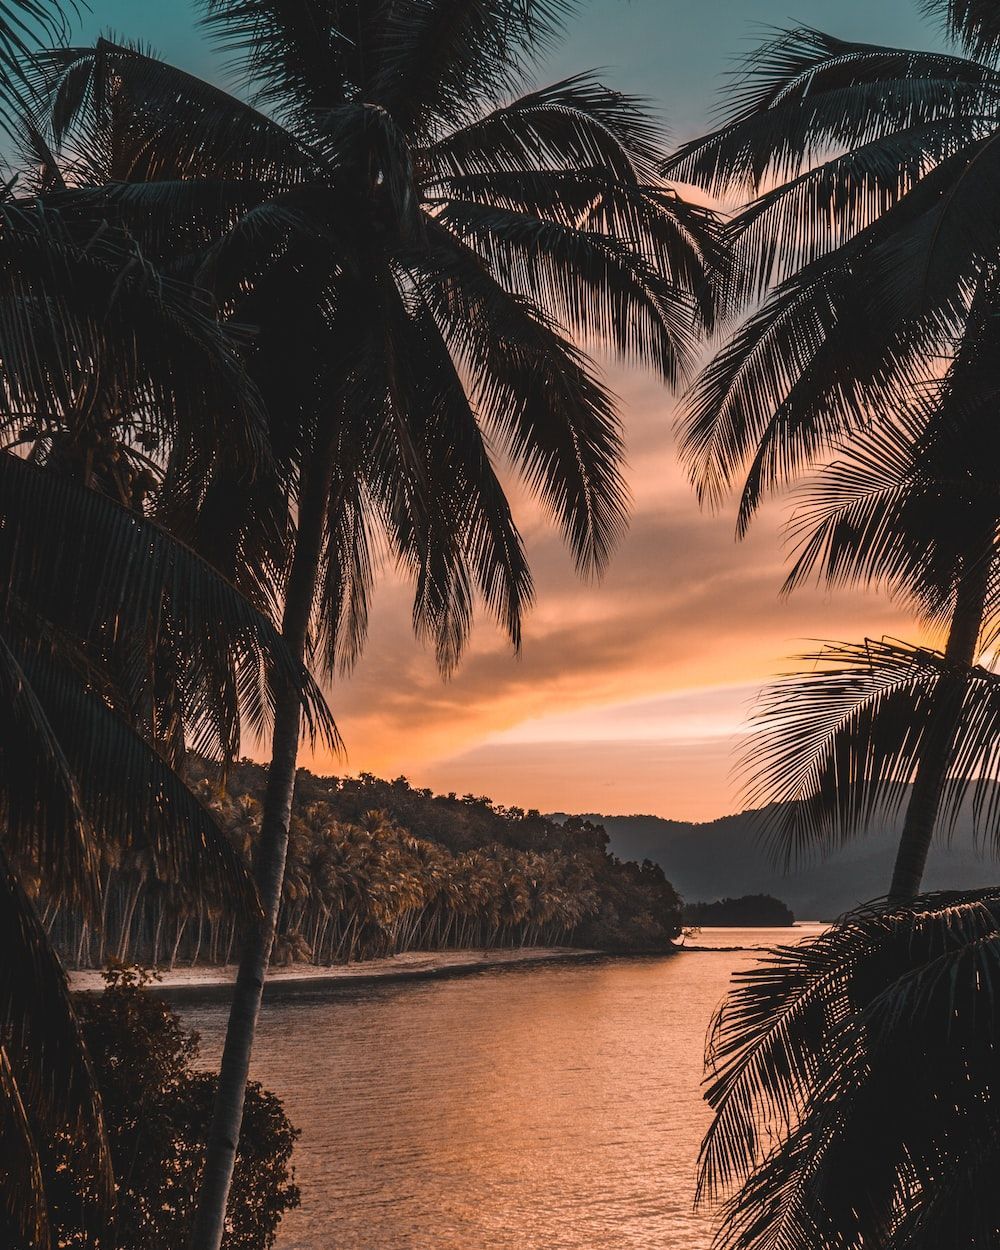 Stunning Tropical Sunset Picture [HD]. Download Free Image